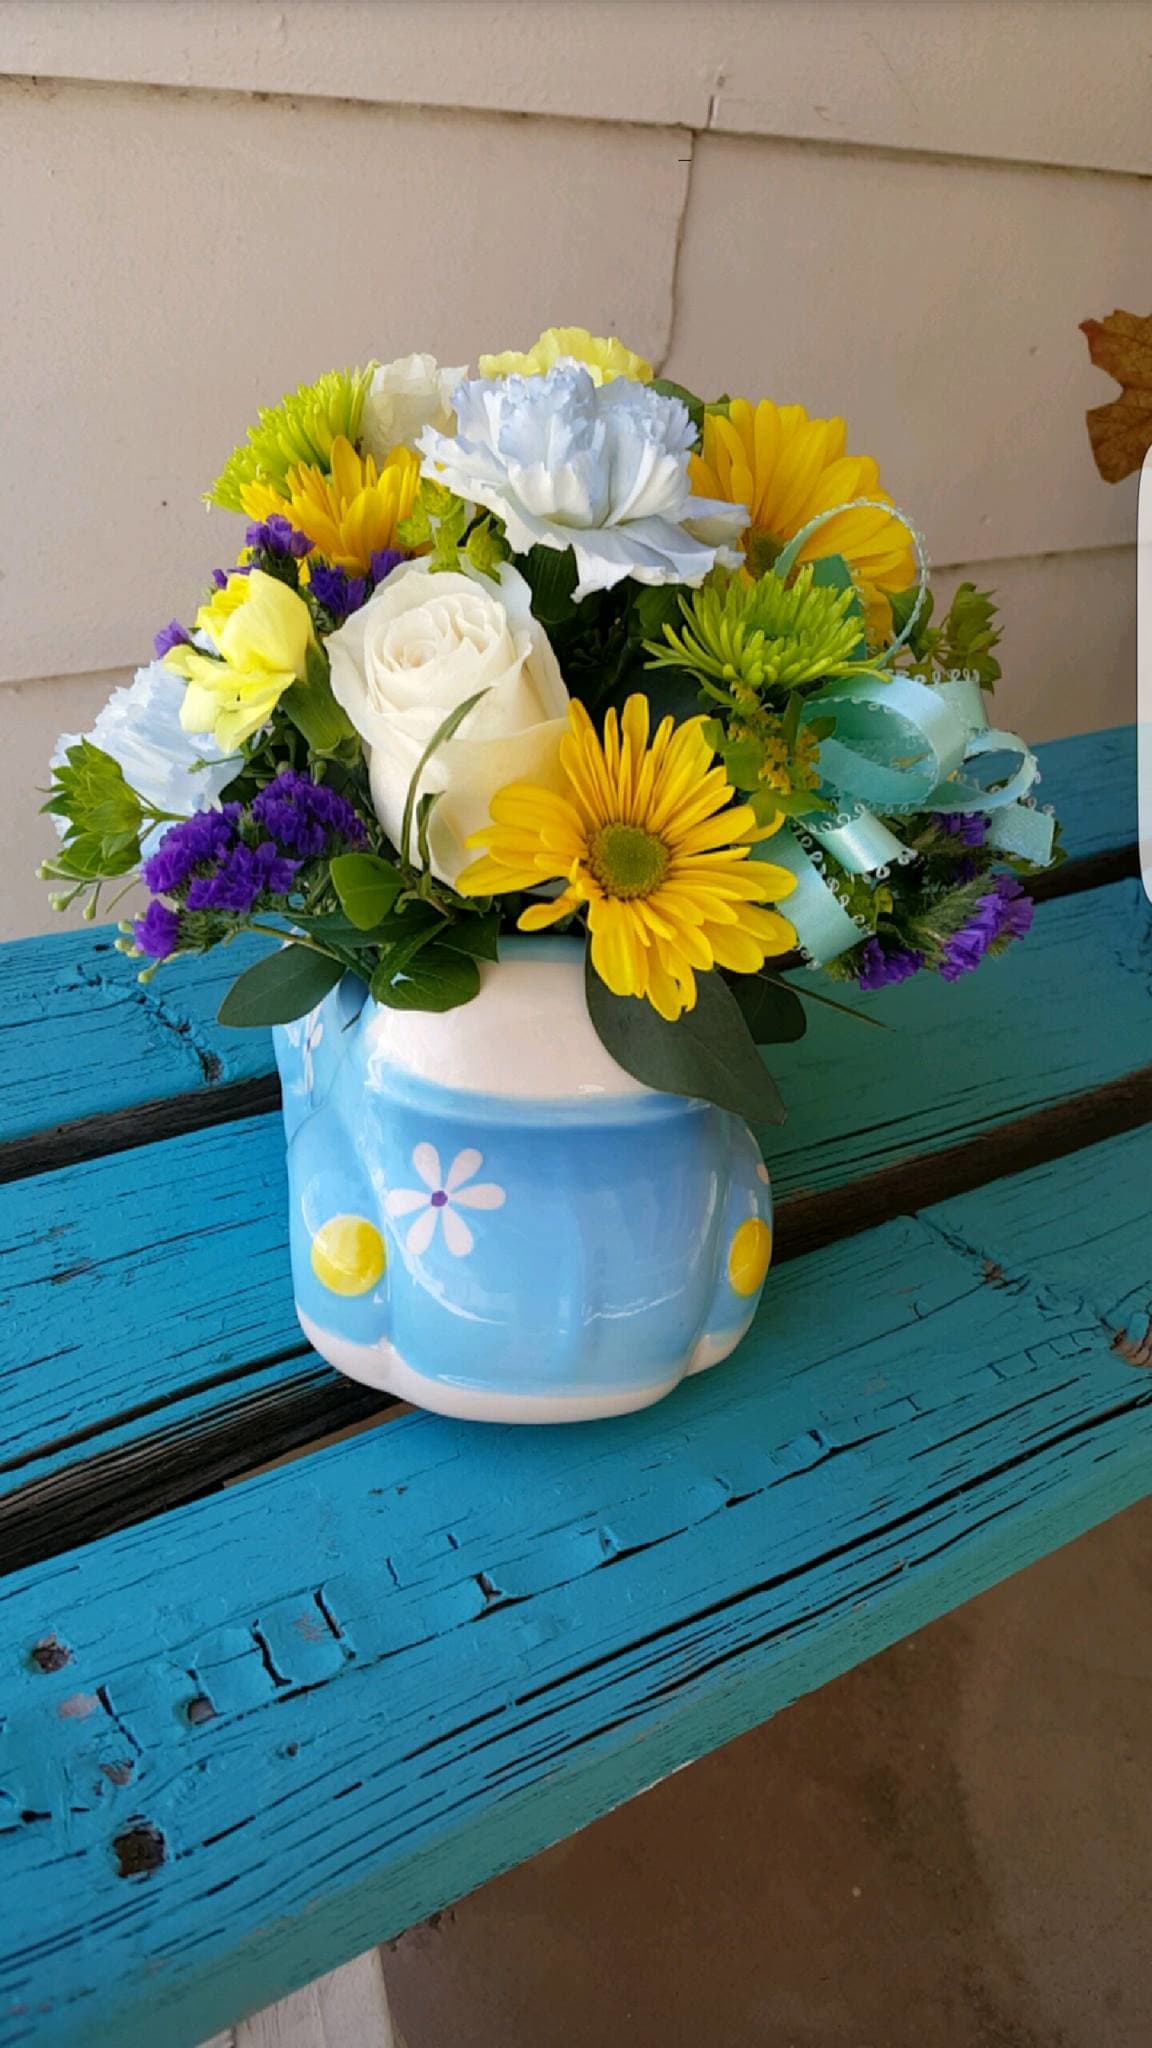 Blue Beetle Bug - Alstroemeria, Daisies, Baby's Breath, and Roses made in a Blue ceramic vase.  Great to celebrate the birth of a baby boy, birthday, or send it to your best friend!  